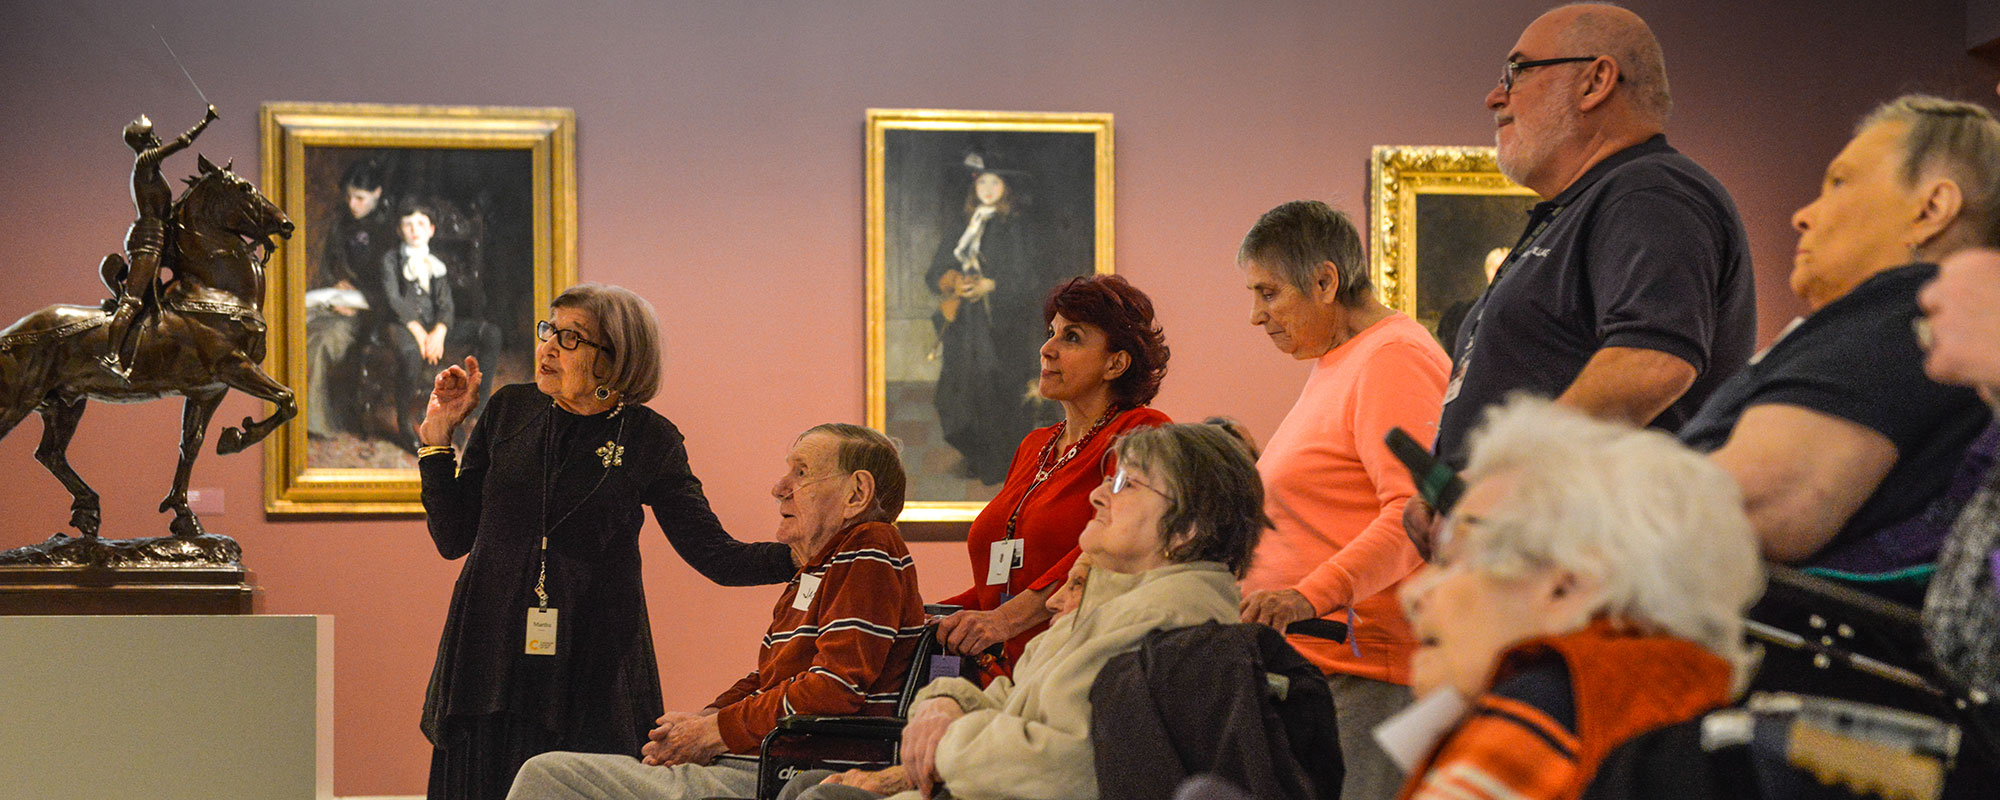 A docent leading a group of Alzheimer patients on a tour of an art gallery